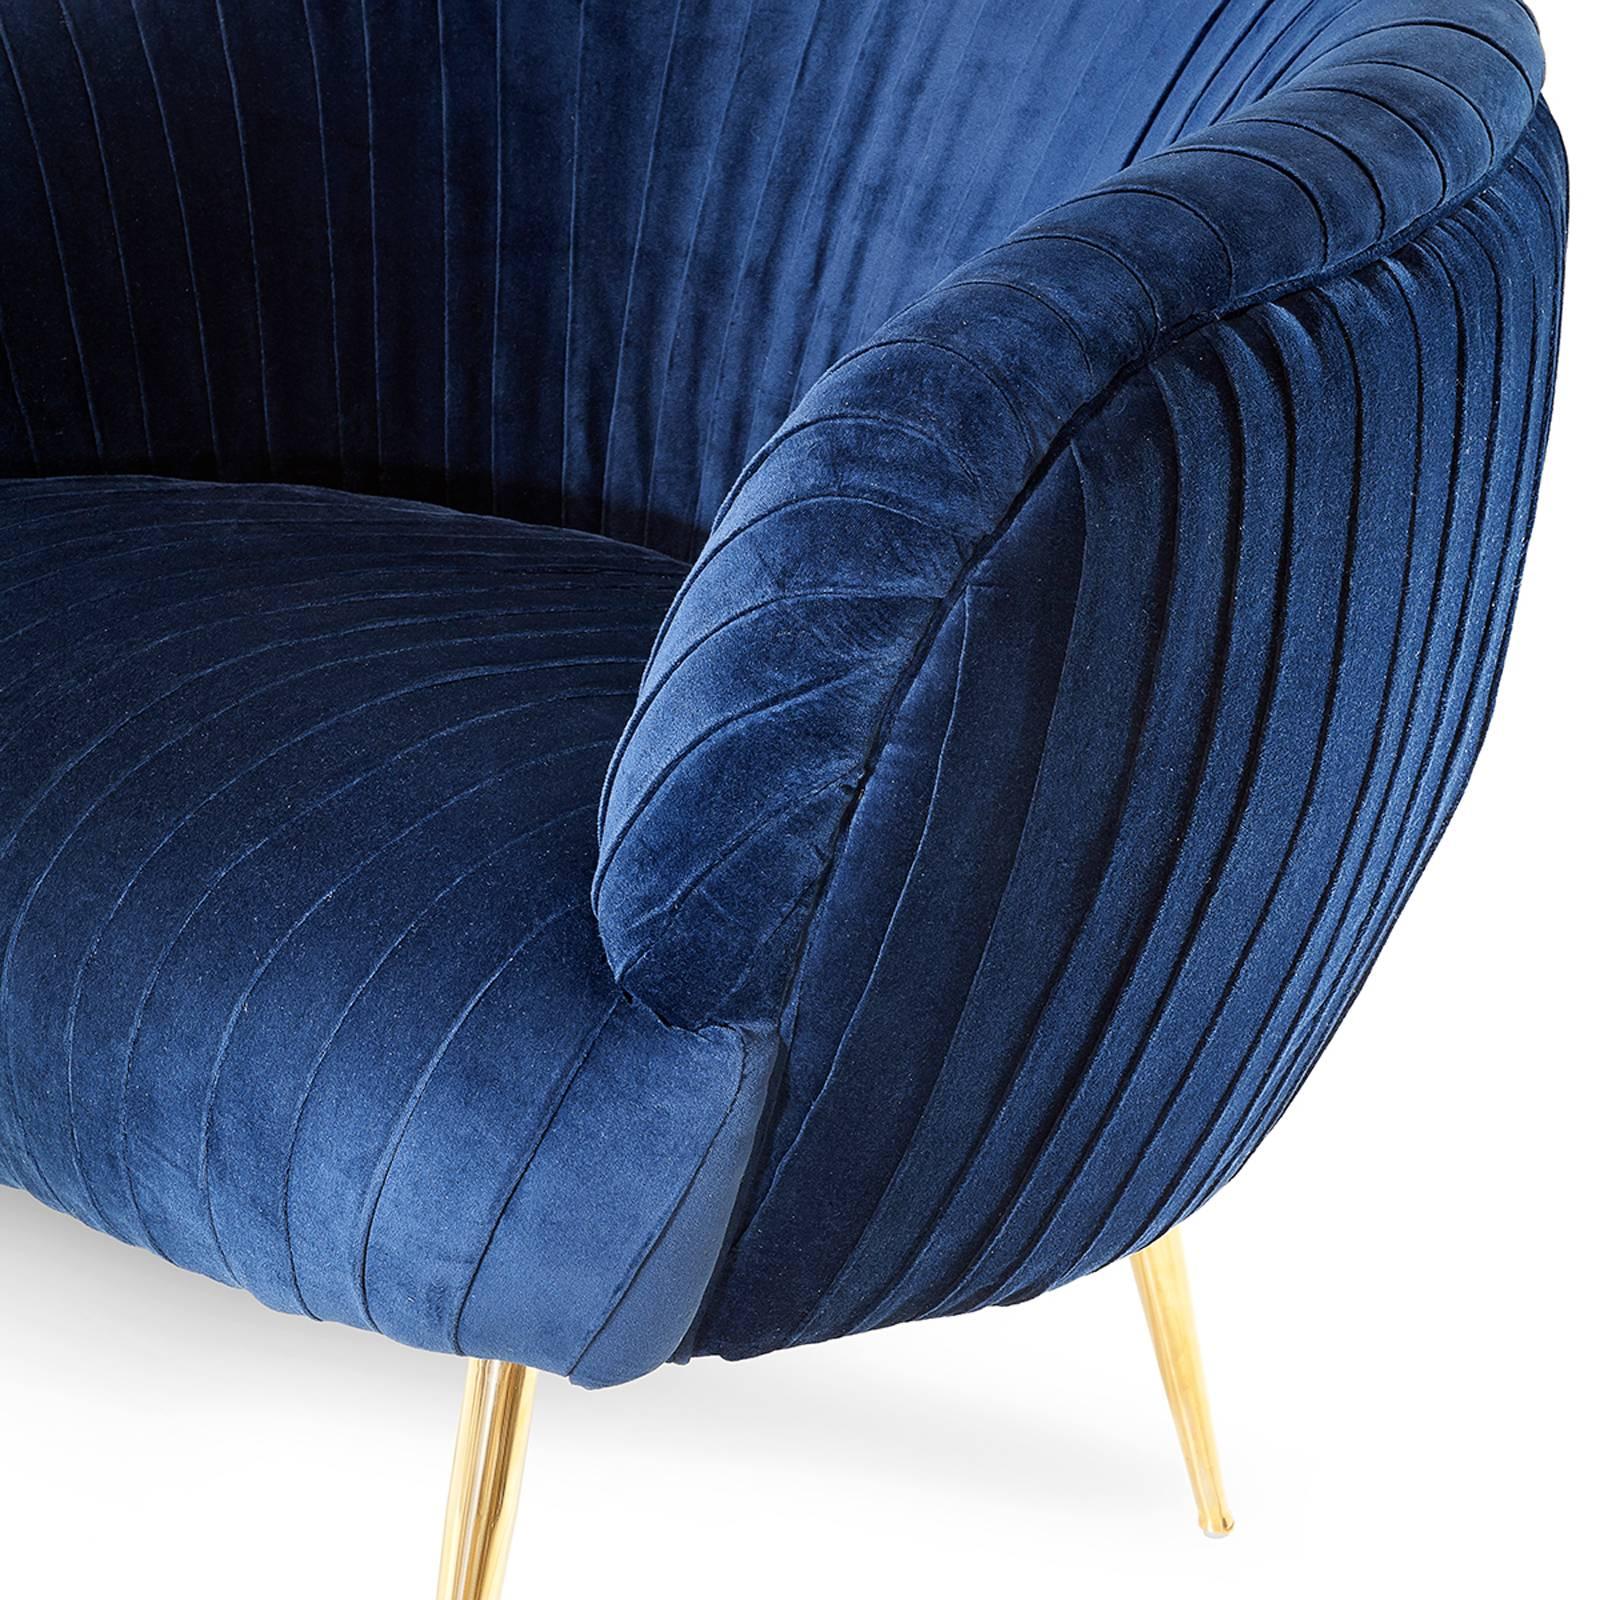 Armchair Diana upholstered in blue soft velvet
with structure in solid wood. Feet in steel in gold 
finish. Also available in yellow or black soft velvet.
 